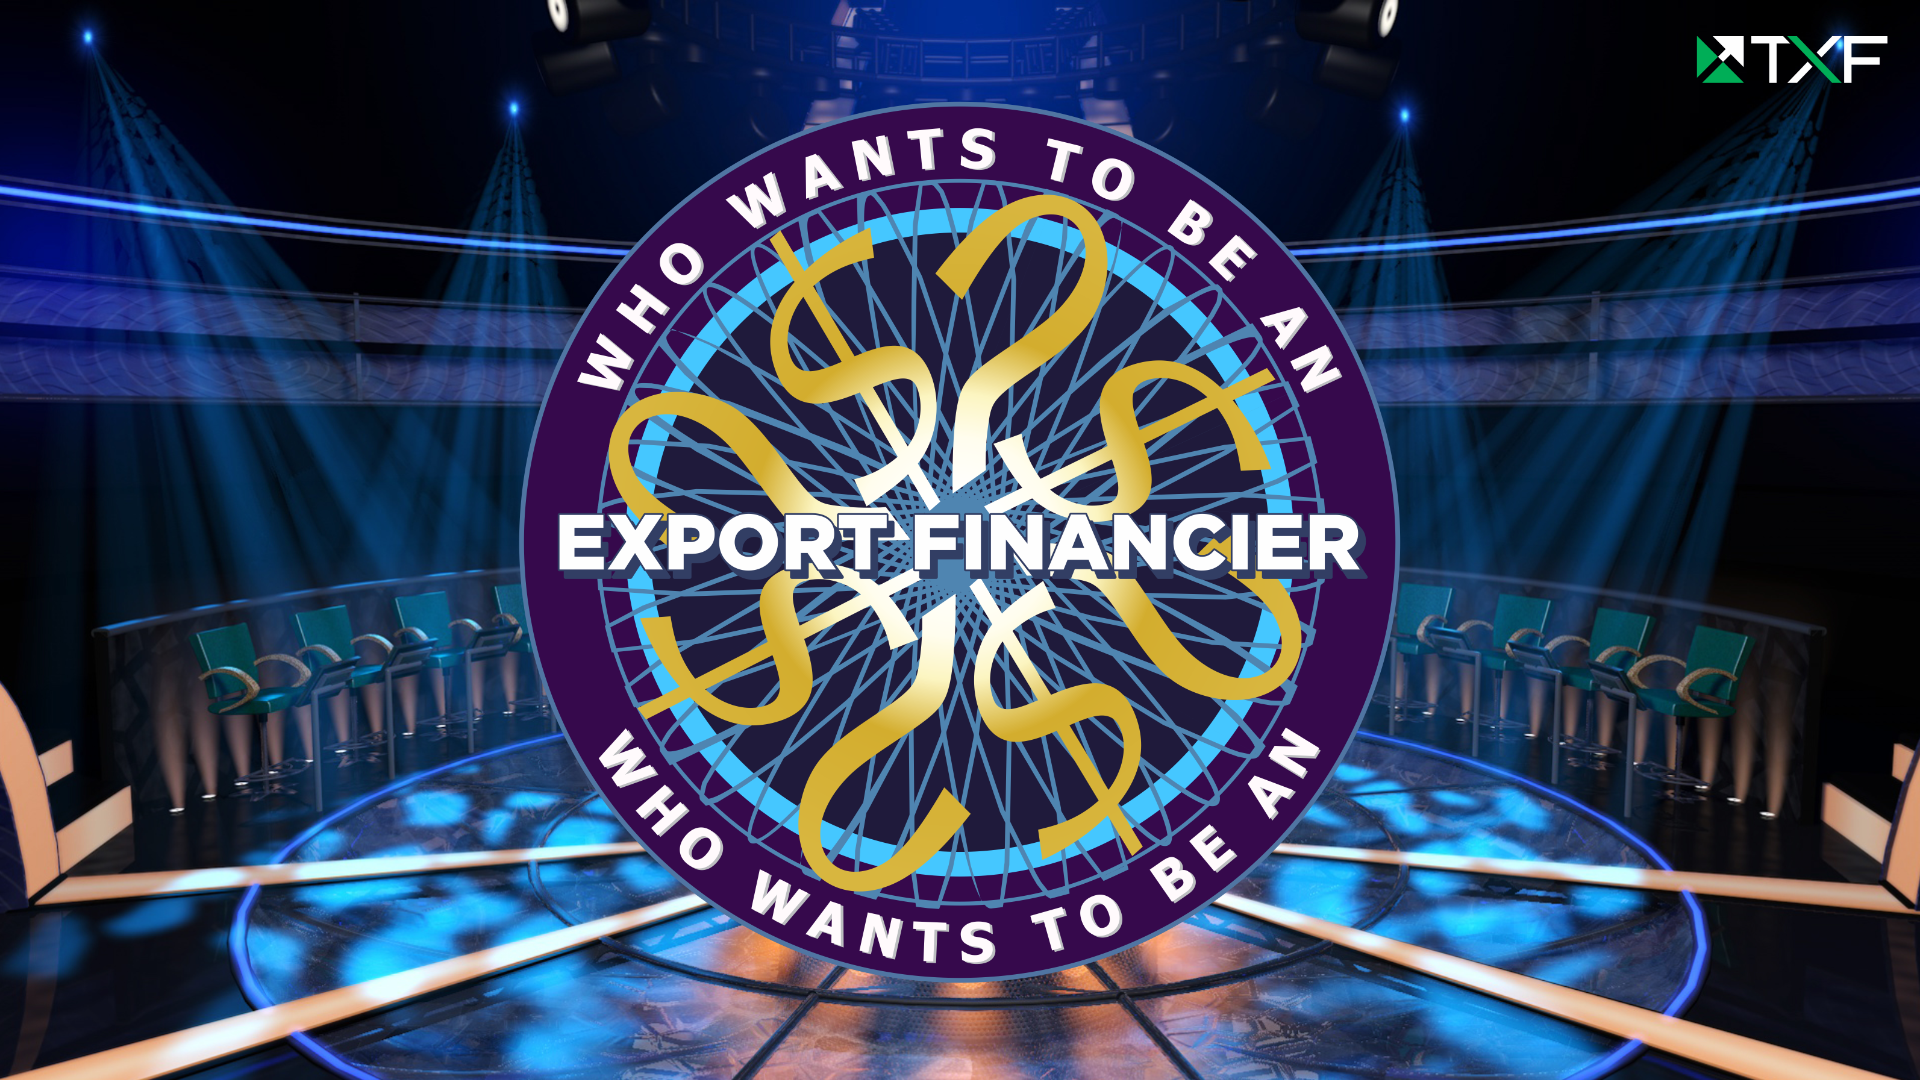 Gameshow: Who wants to be an export financier?